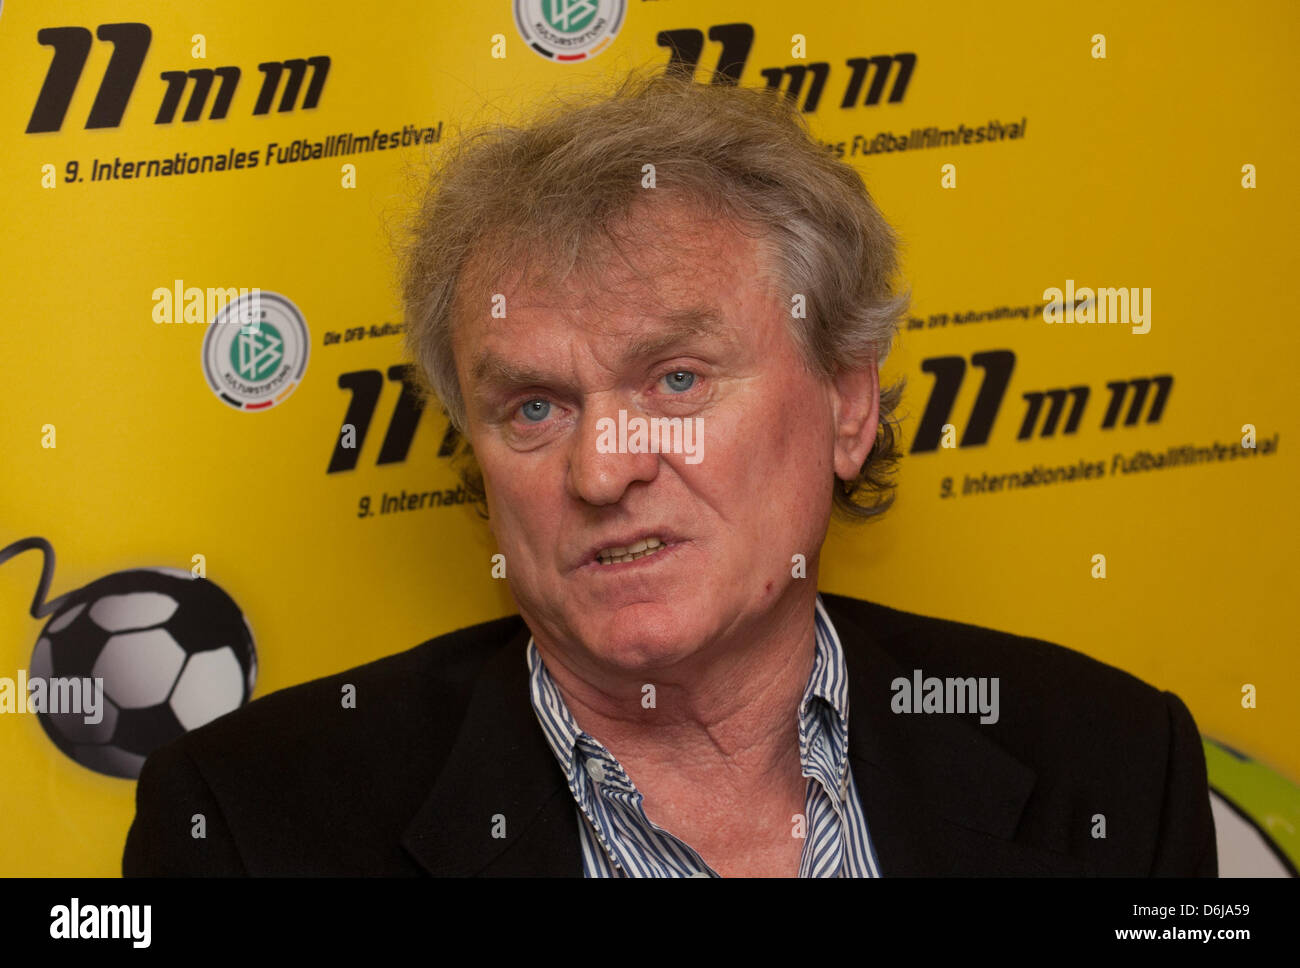 Former German national team goalkeeper Sepp Maier arrives for the opening of the 2012  '11mm' soccer film festival at Kino Babylon in Berlin, Germany, 09 March 2012. The festival opens with Maier's film 'We are the champions - Sepp Maiers WM-Videotagebuch 1990' ('We are the champions - Sepp Maiers World Cup Video Diary 1990') and runs until 13 March. Photo: JOERG CARSTENSEN Stock Photo